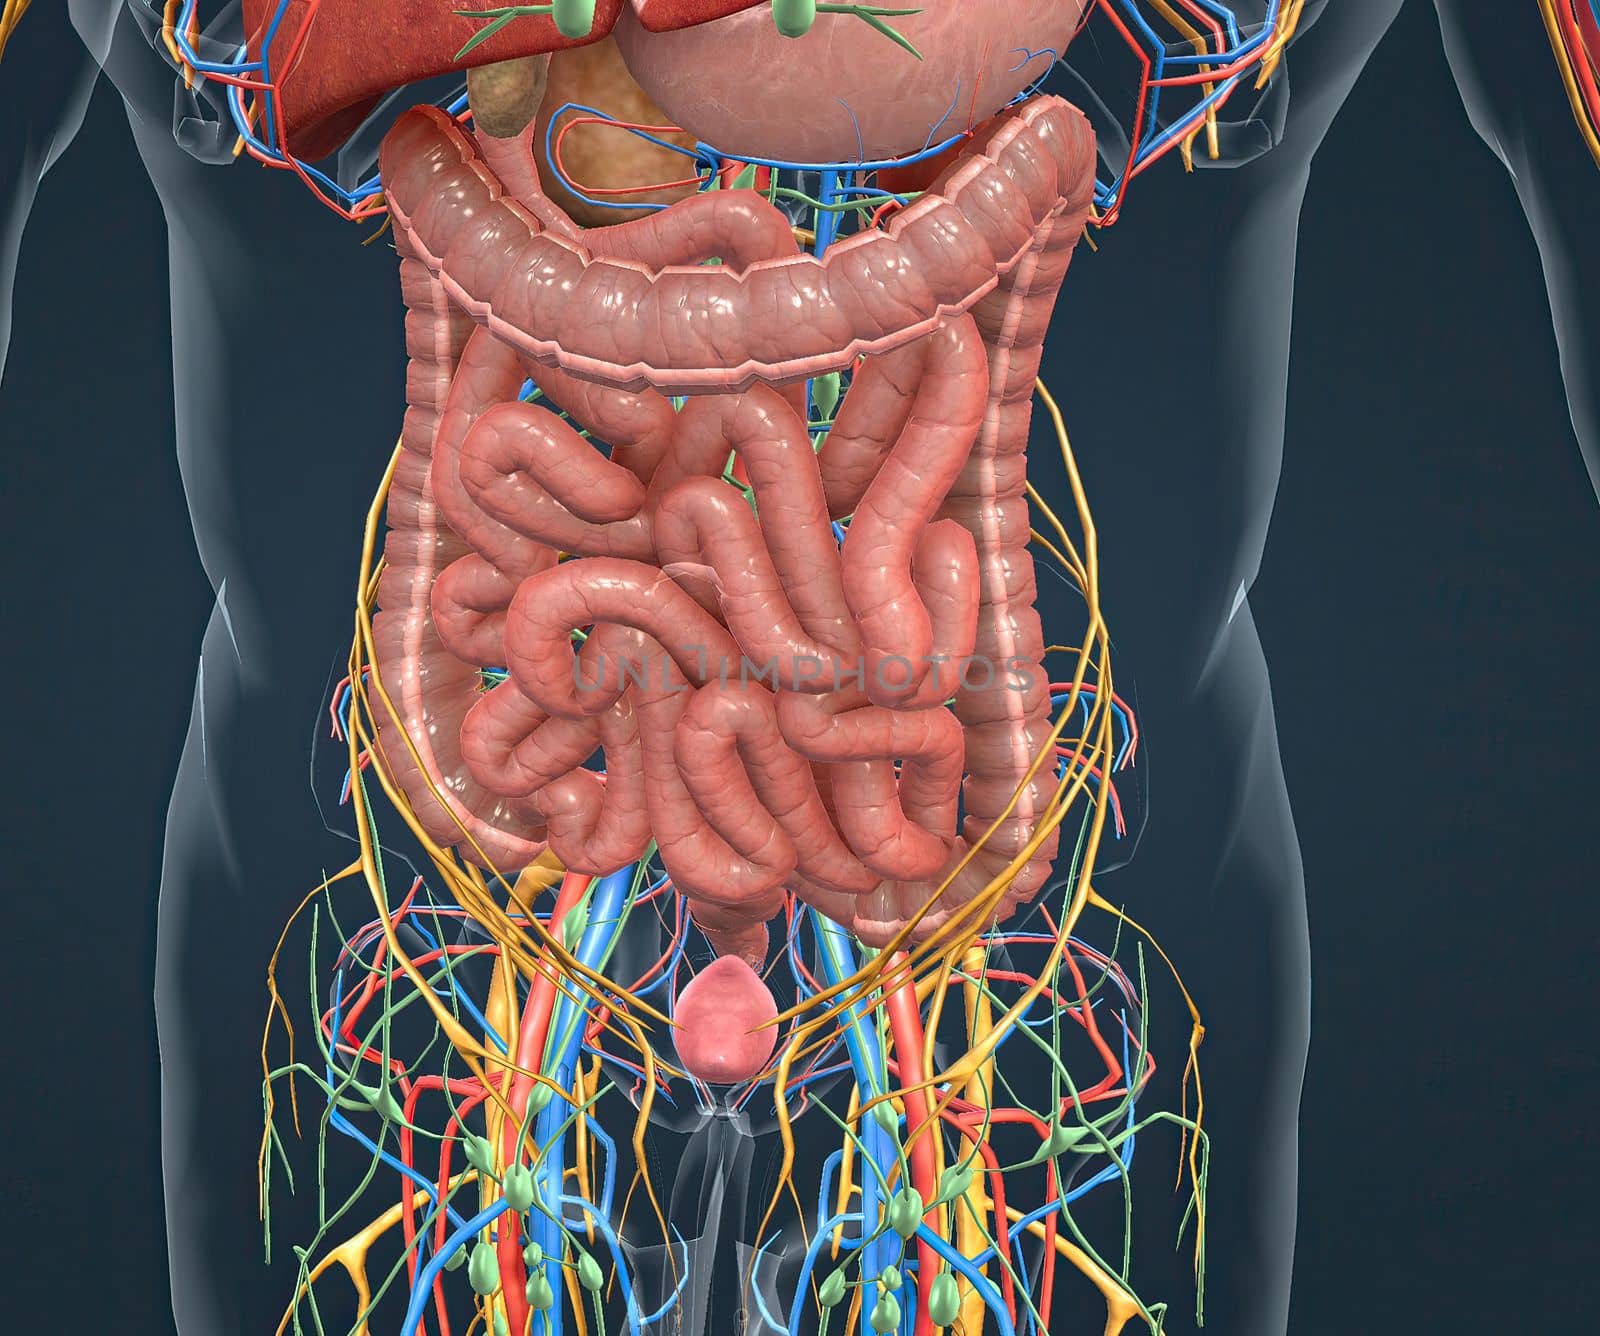 Digestive system, nervous system and vascular pathways by creativepic